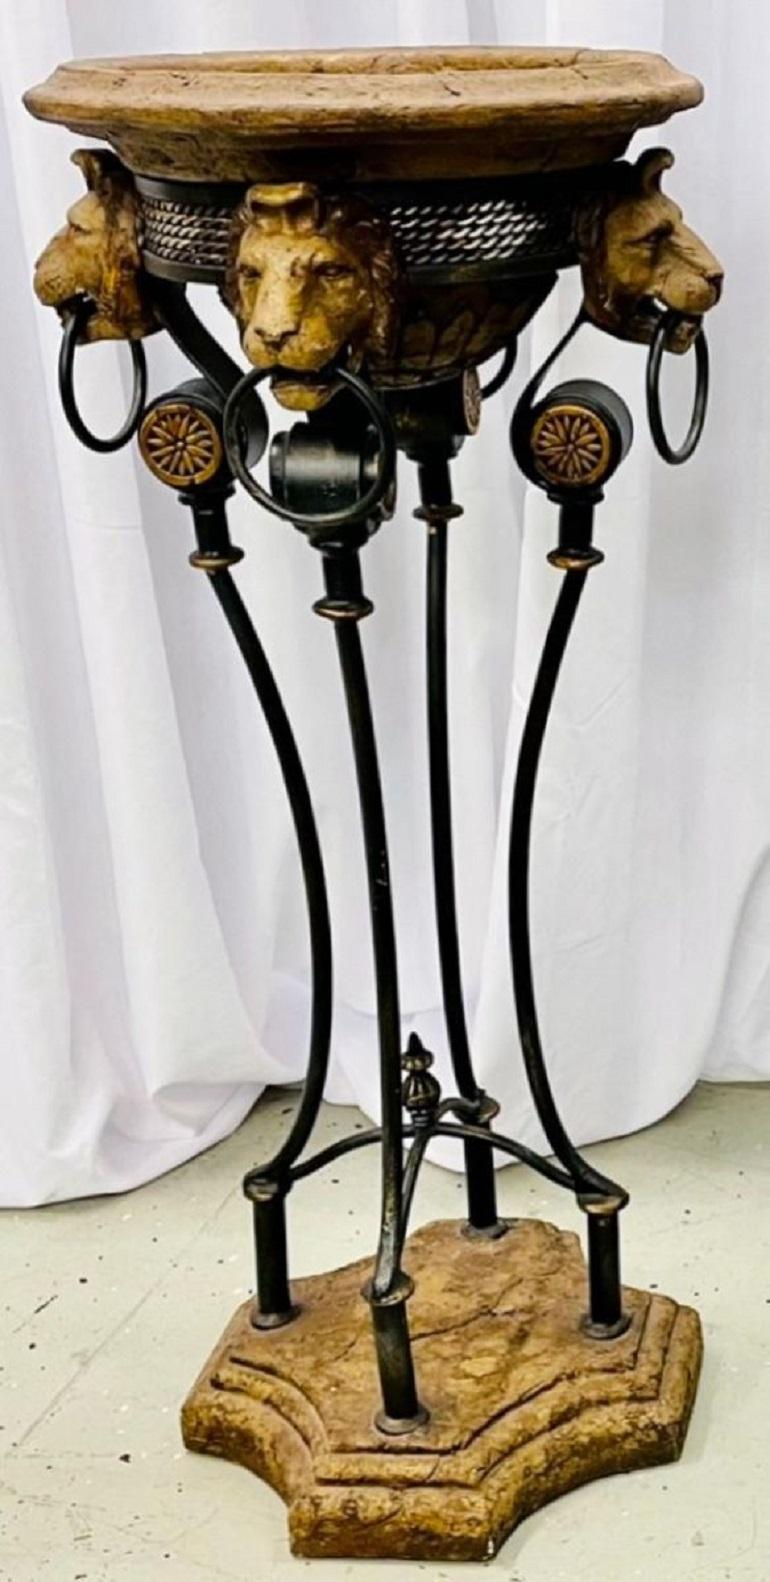 A Pair of Neoclassical Style Planters / Jardinières on Metal Stands. Each having four lions with rings in their mouths on a metal stand supported by an octagonal Antique base. The removable potted tops with hairy inserts. The pair having an aged